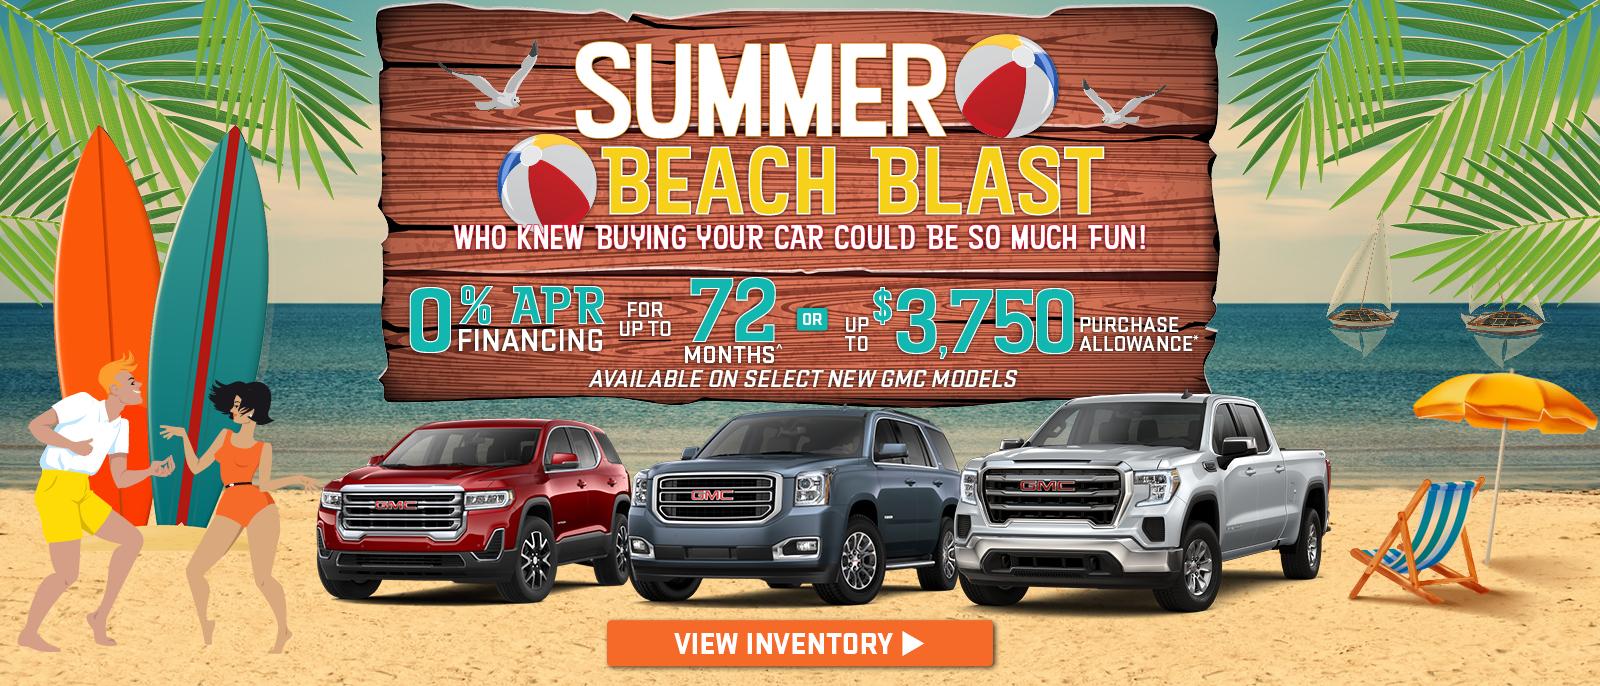 New GMC Specials in Billings, MT |  0% APR FINANCING FOR UP TO 72 MONTHS^ OR UP TO $3,750 PURCHASE ALLOWANCE*